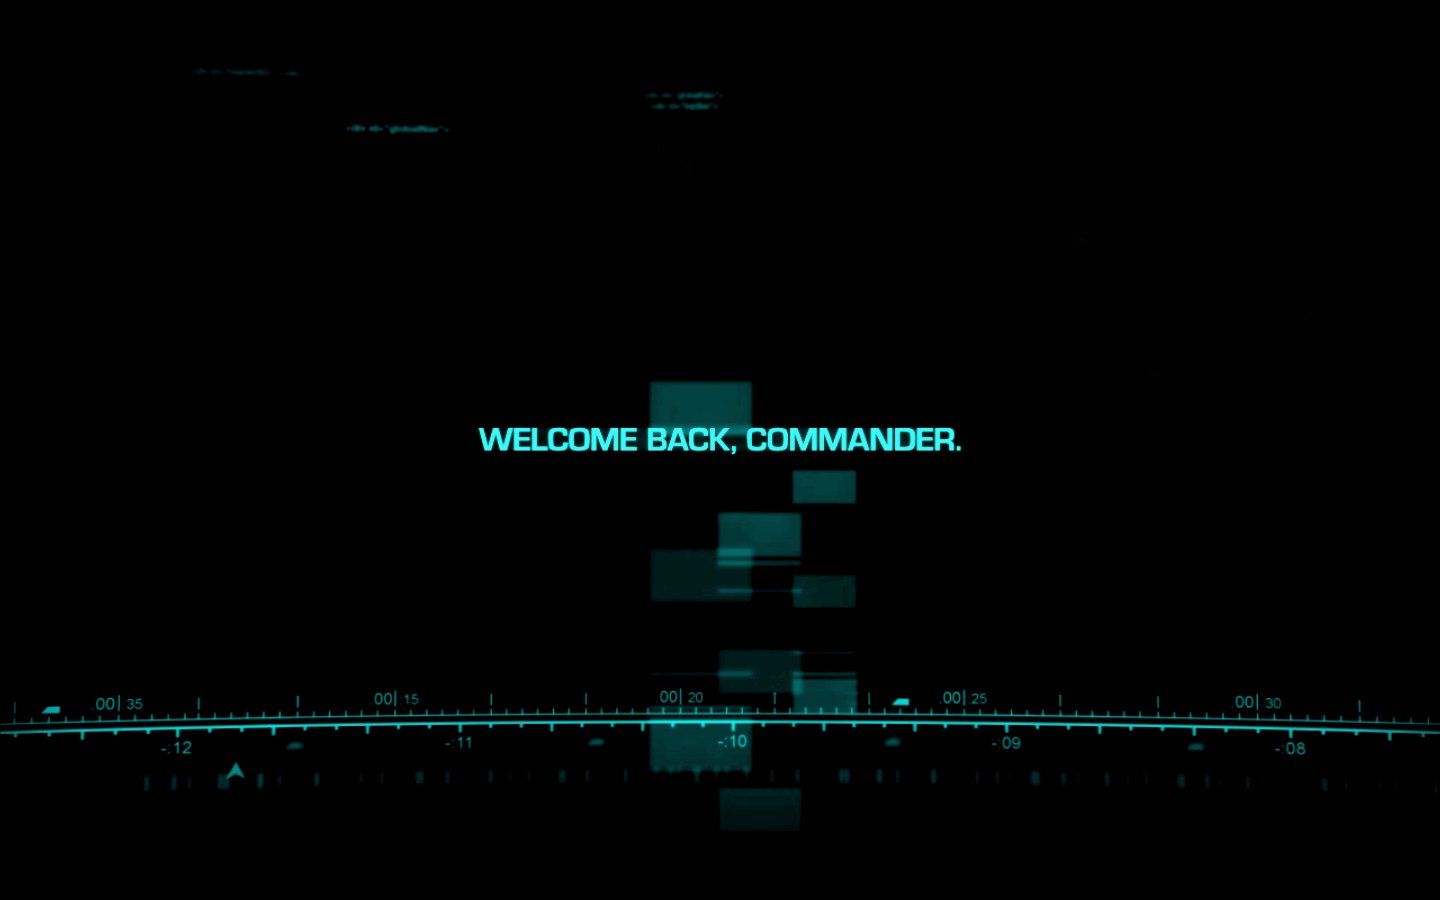 Welcome back, commander! Wallpaper and Background Imagex900